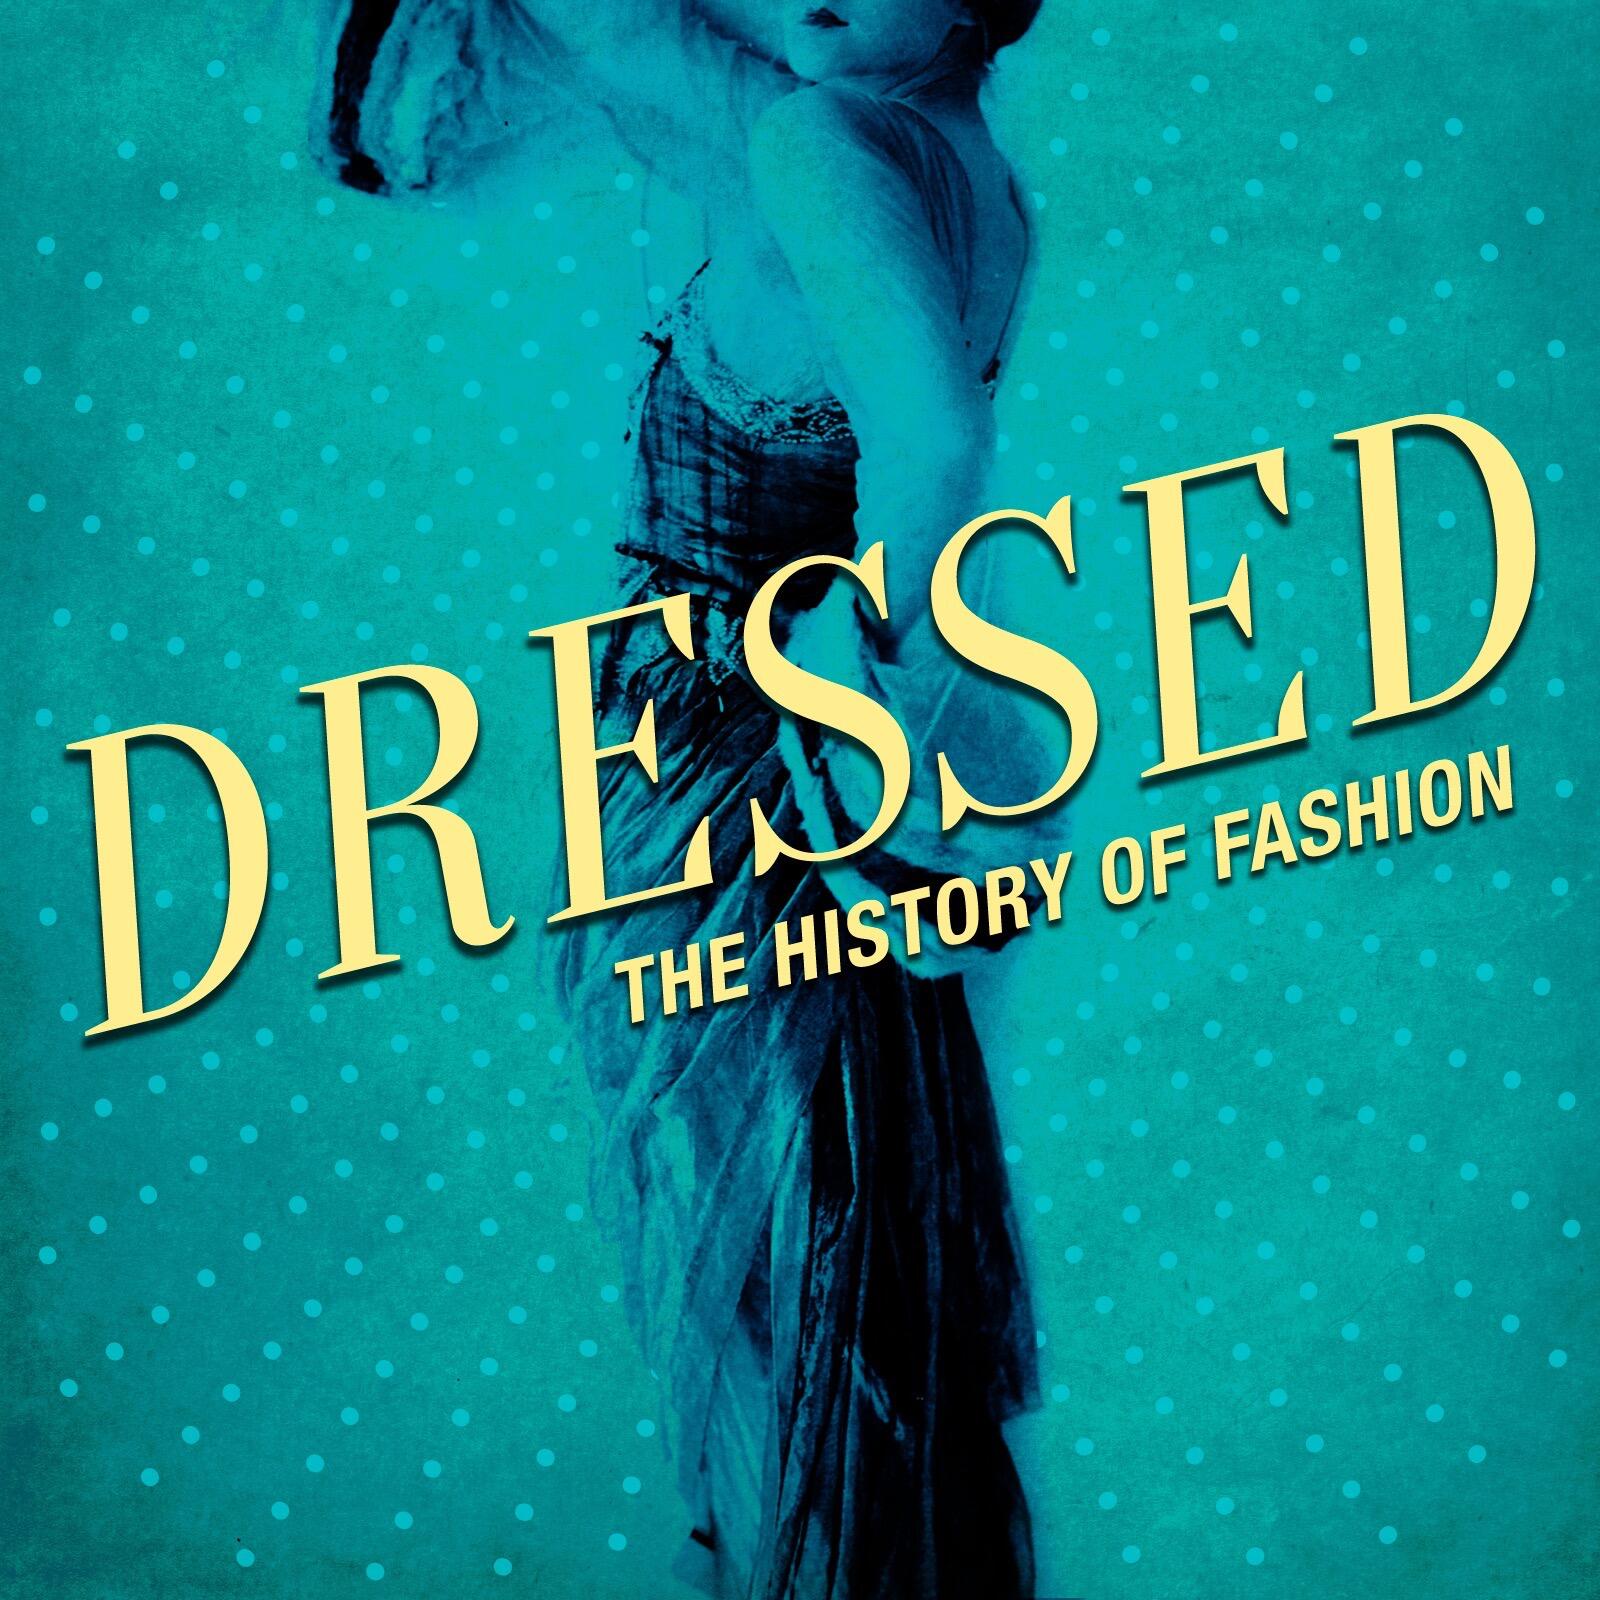 Dressed: The History of Fashion | iHeart